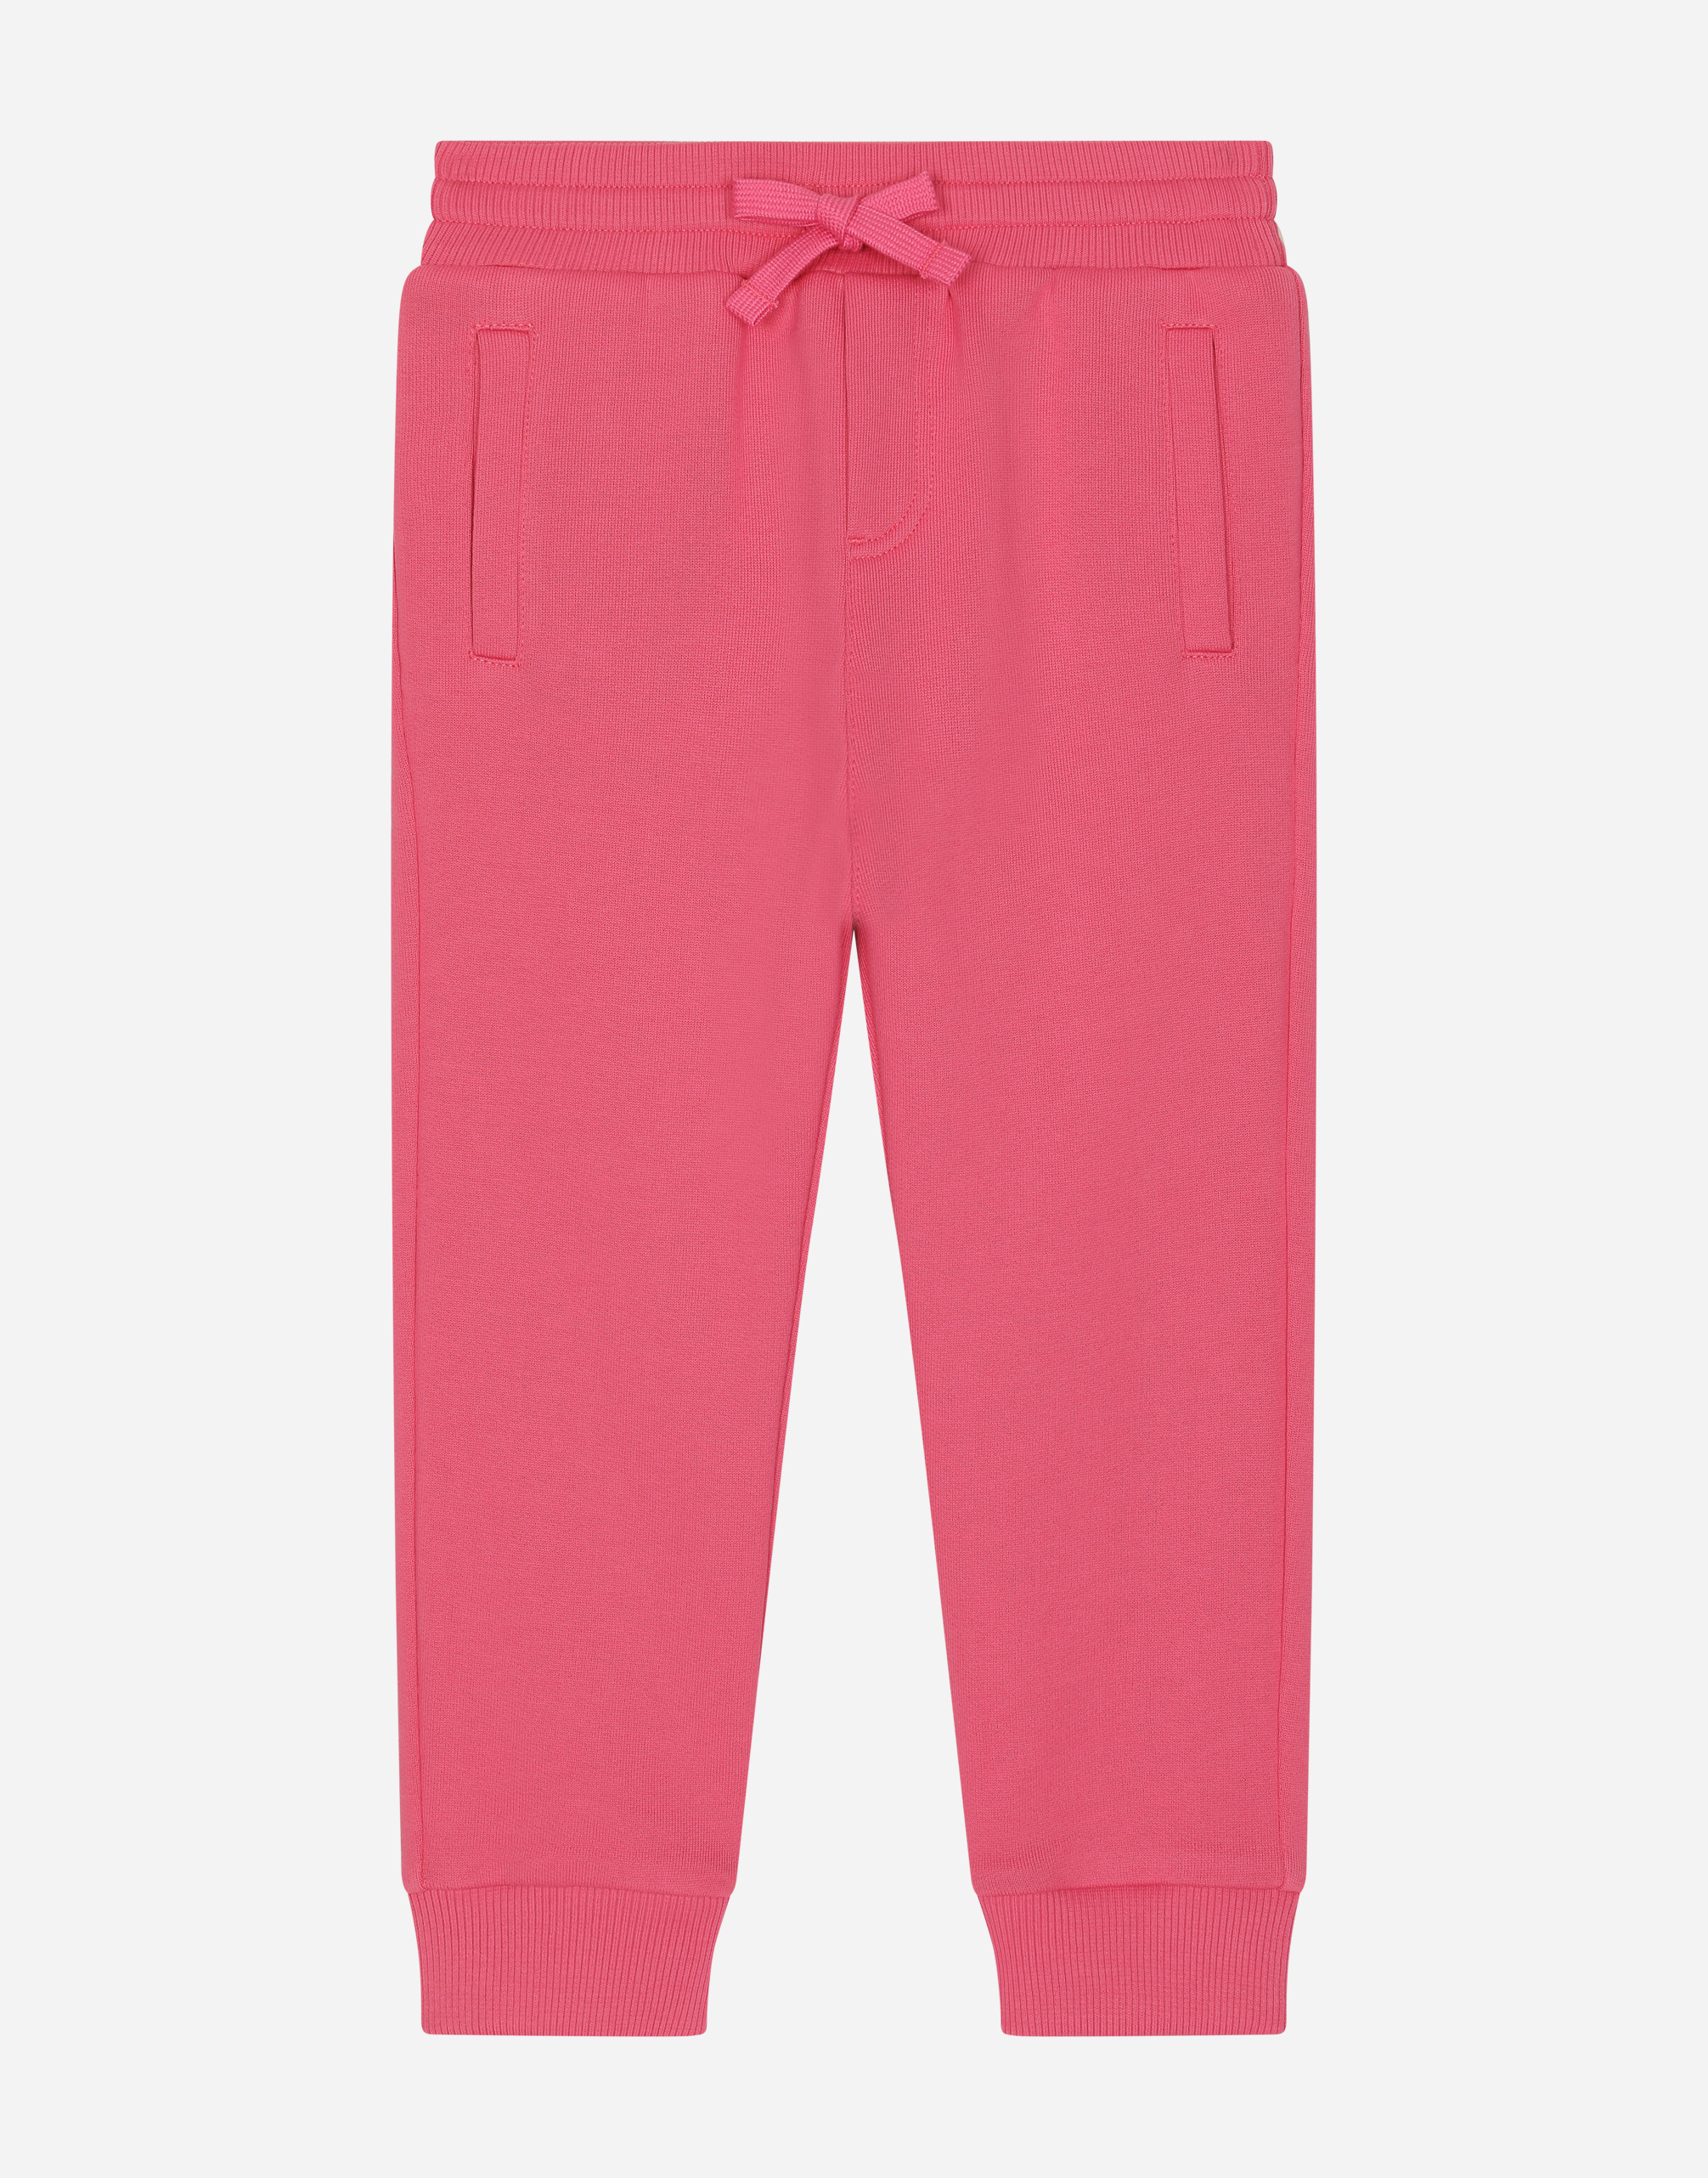 Jersey jogging pants with branded tag in Pink